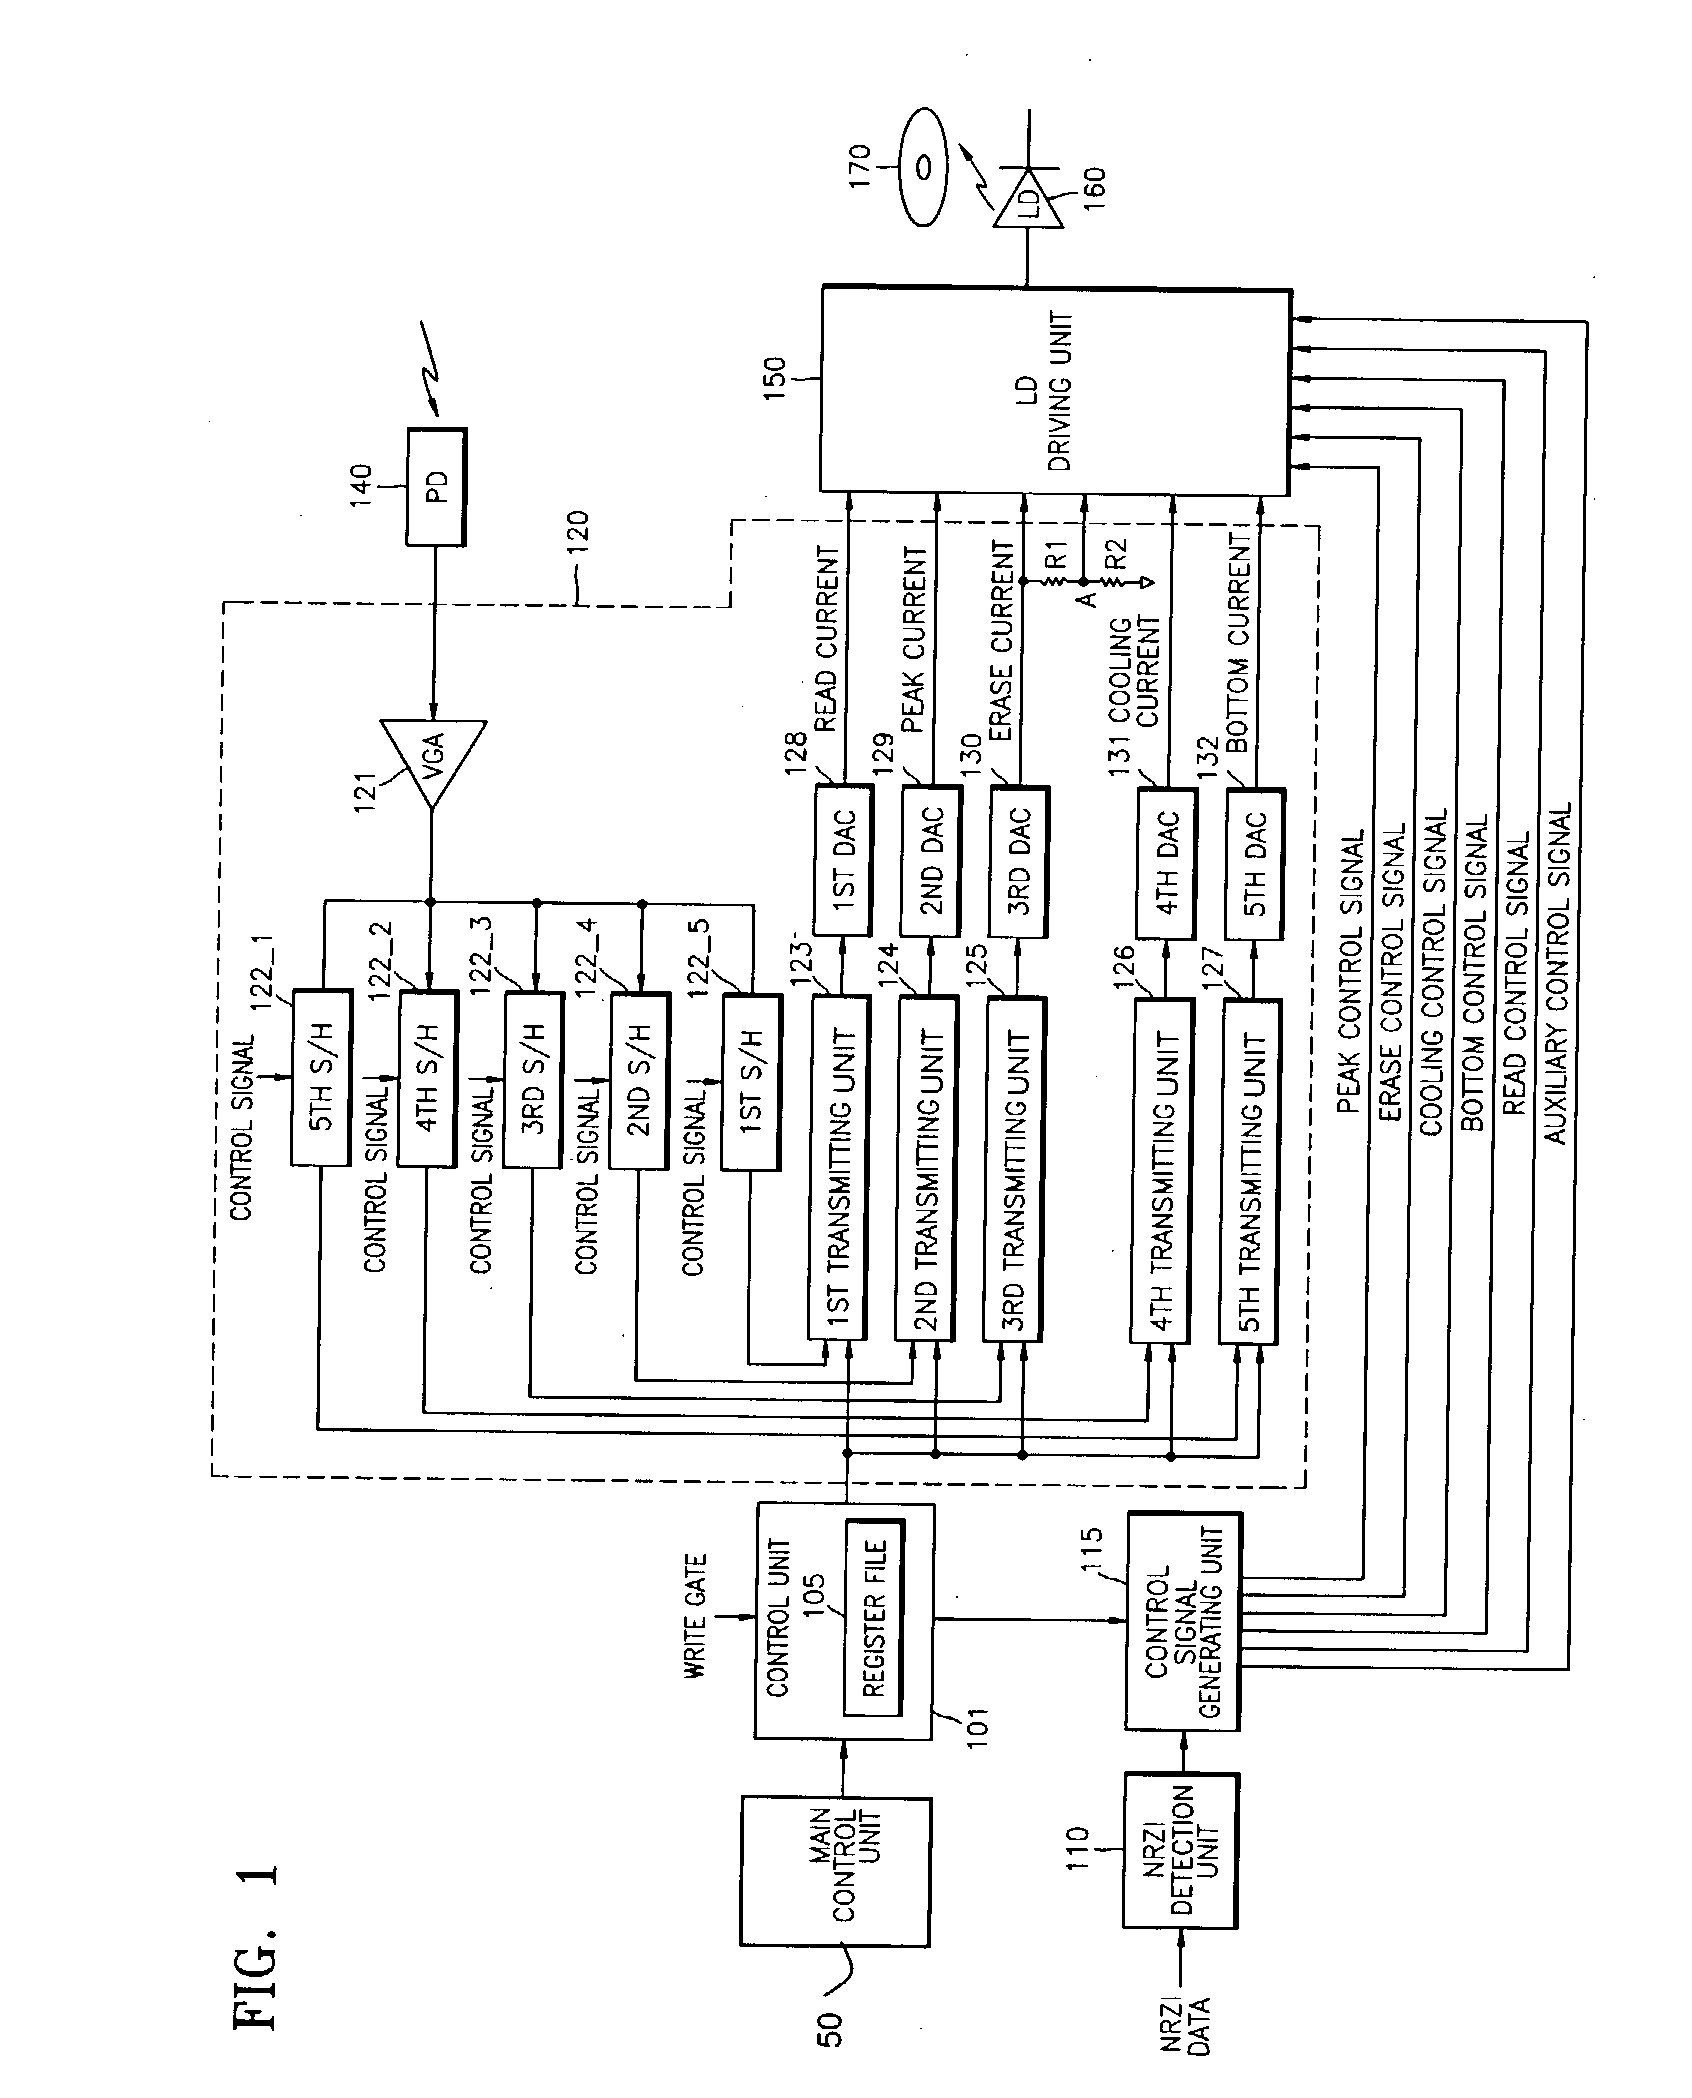 Apparatus and method for generating write pulse appropriate for various optical recording media